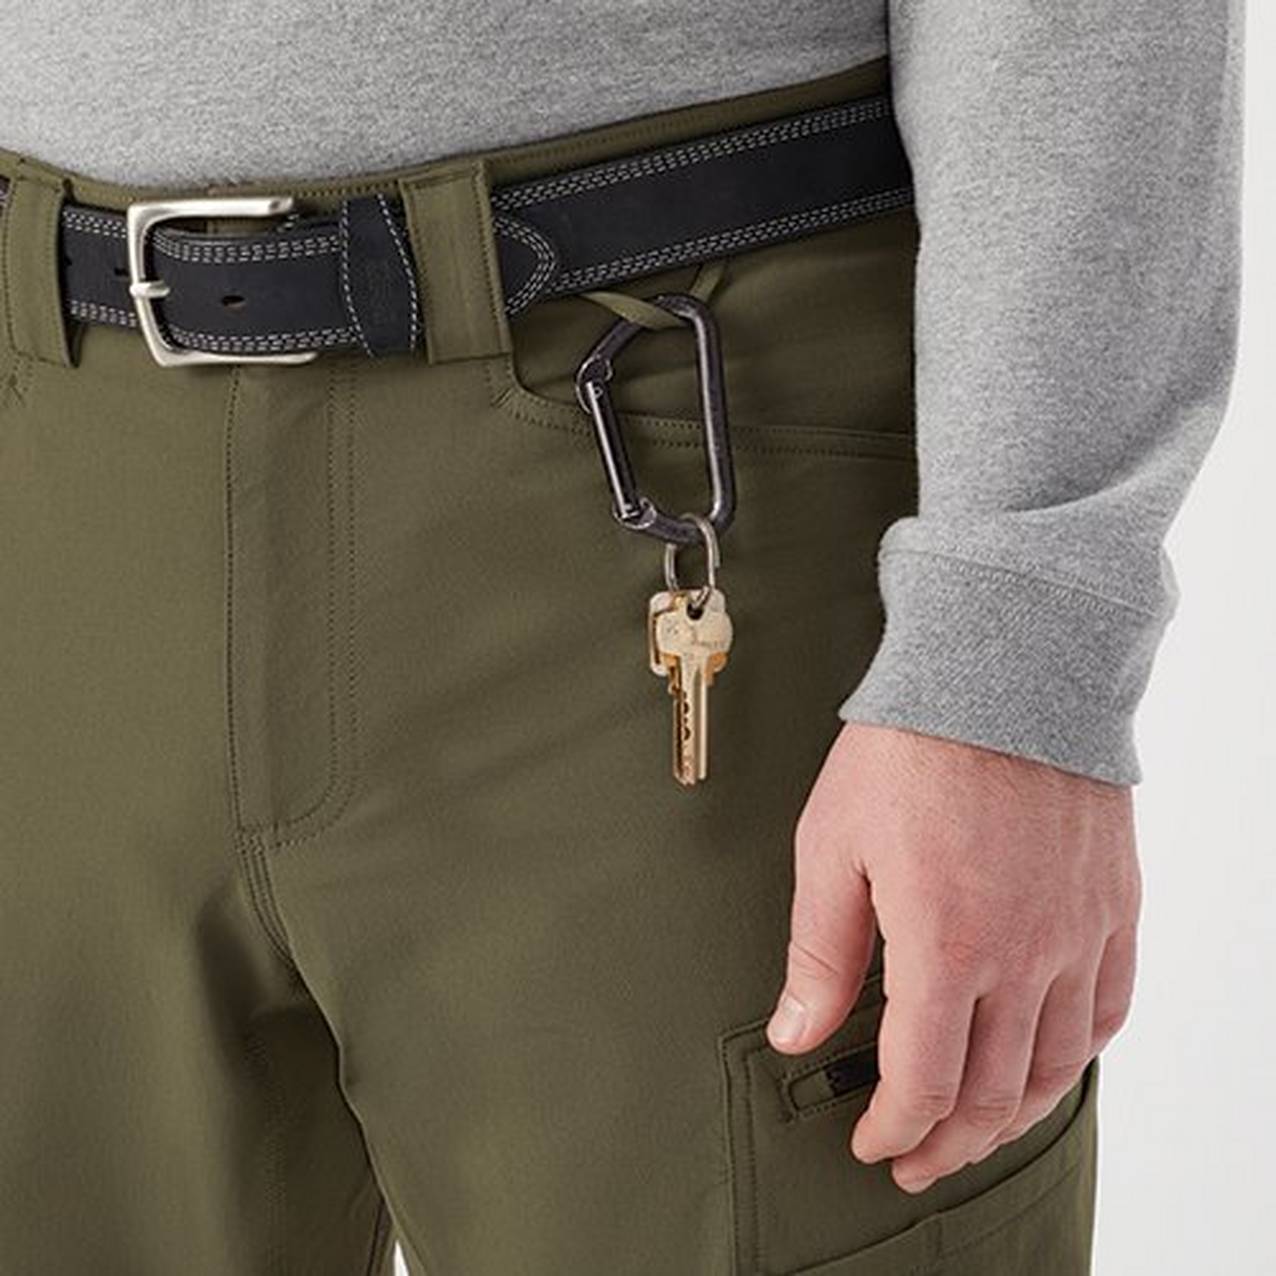 Close up of a pair of pants with a key hanging on a carabiner from a special loop built above the front pocket